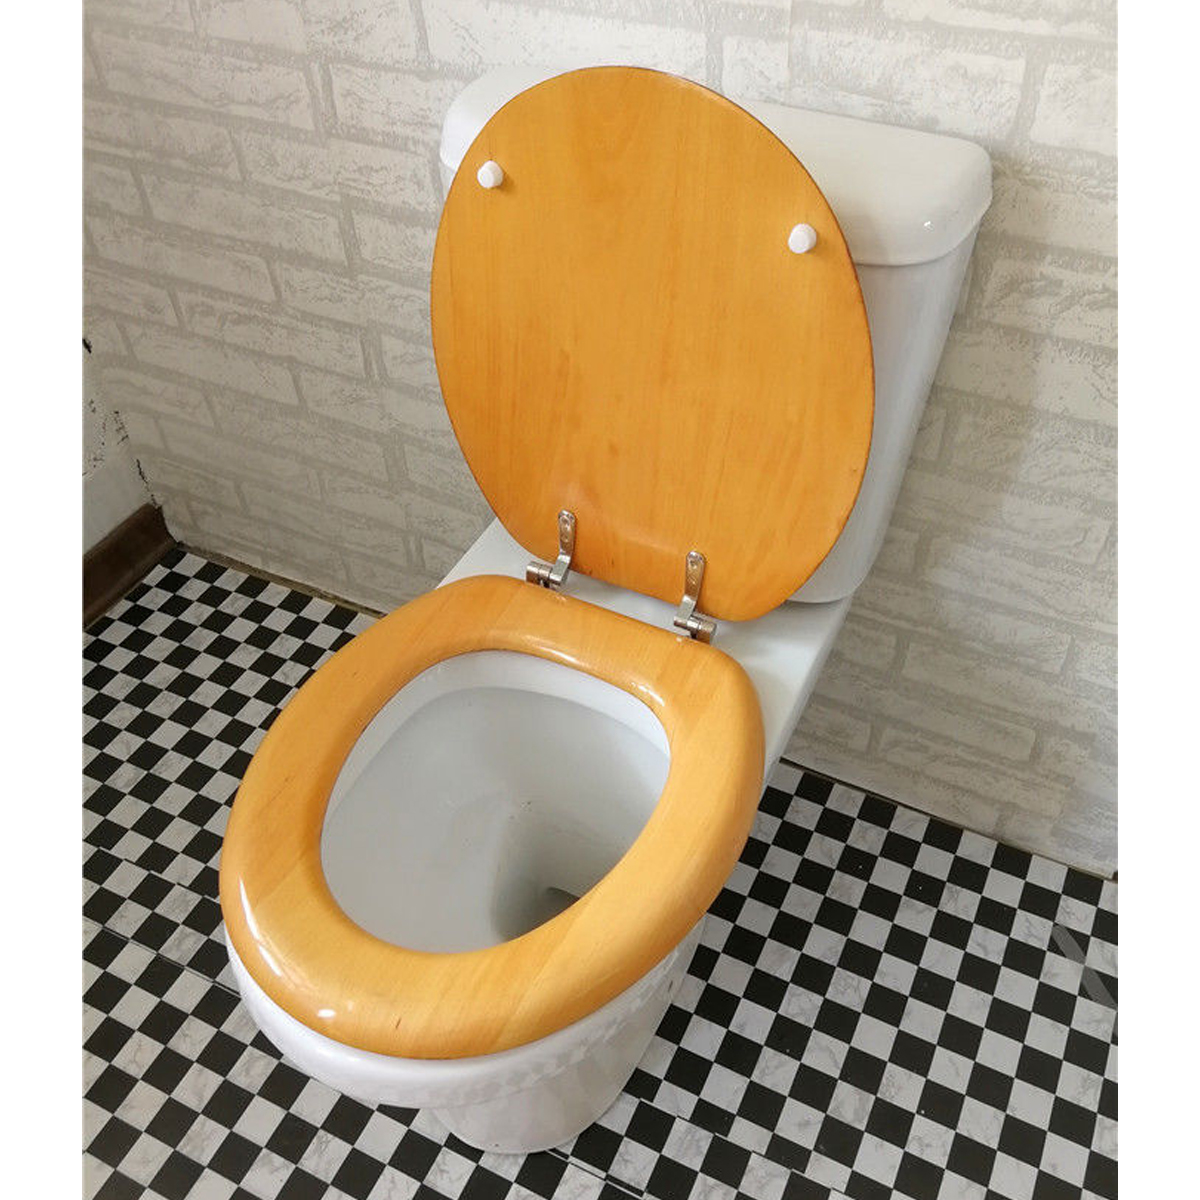 Toilet-Seat-Covers-Round-Wood-Durable-Lift-off-Closed-Front-Elongated-Comfort-1504290